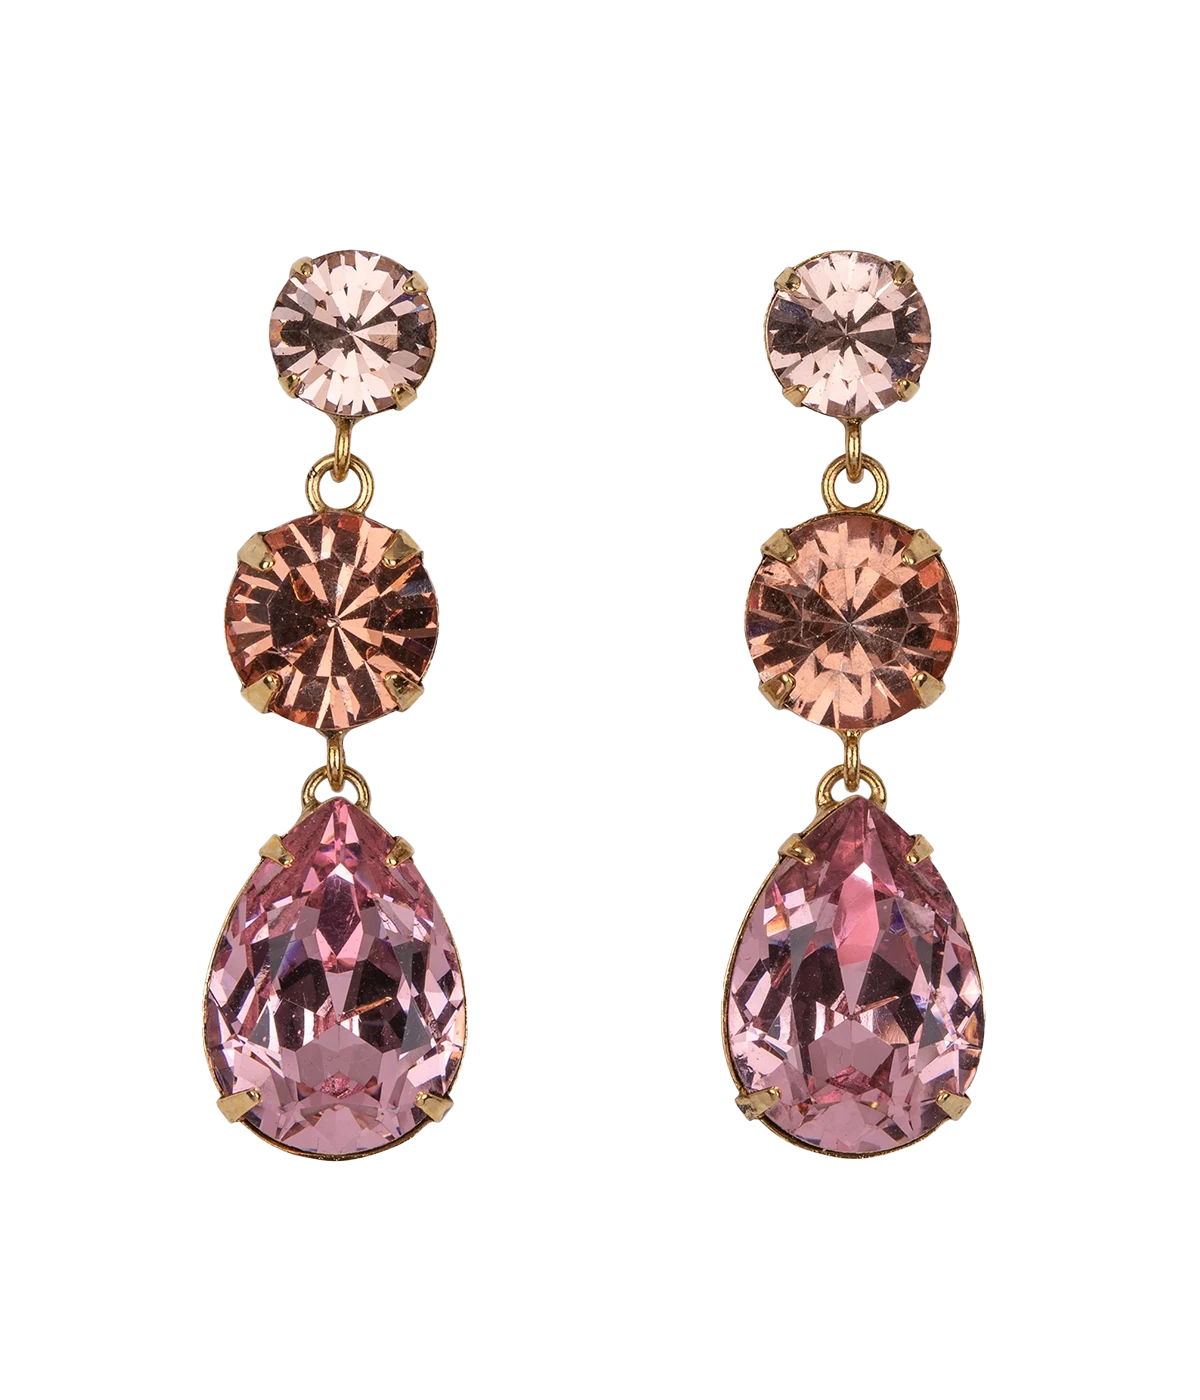 A statement drop earring, fetauring three rose coloured crystals and gold hardware. Statement jewelry, comfortable, party earrings, special occasion jewelry.   